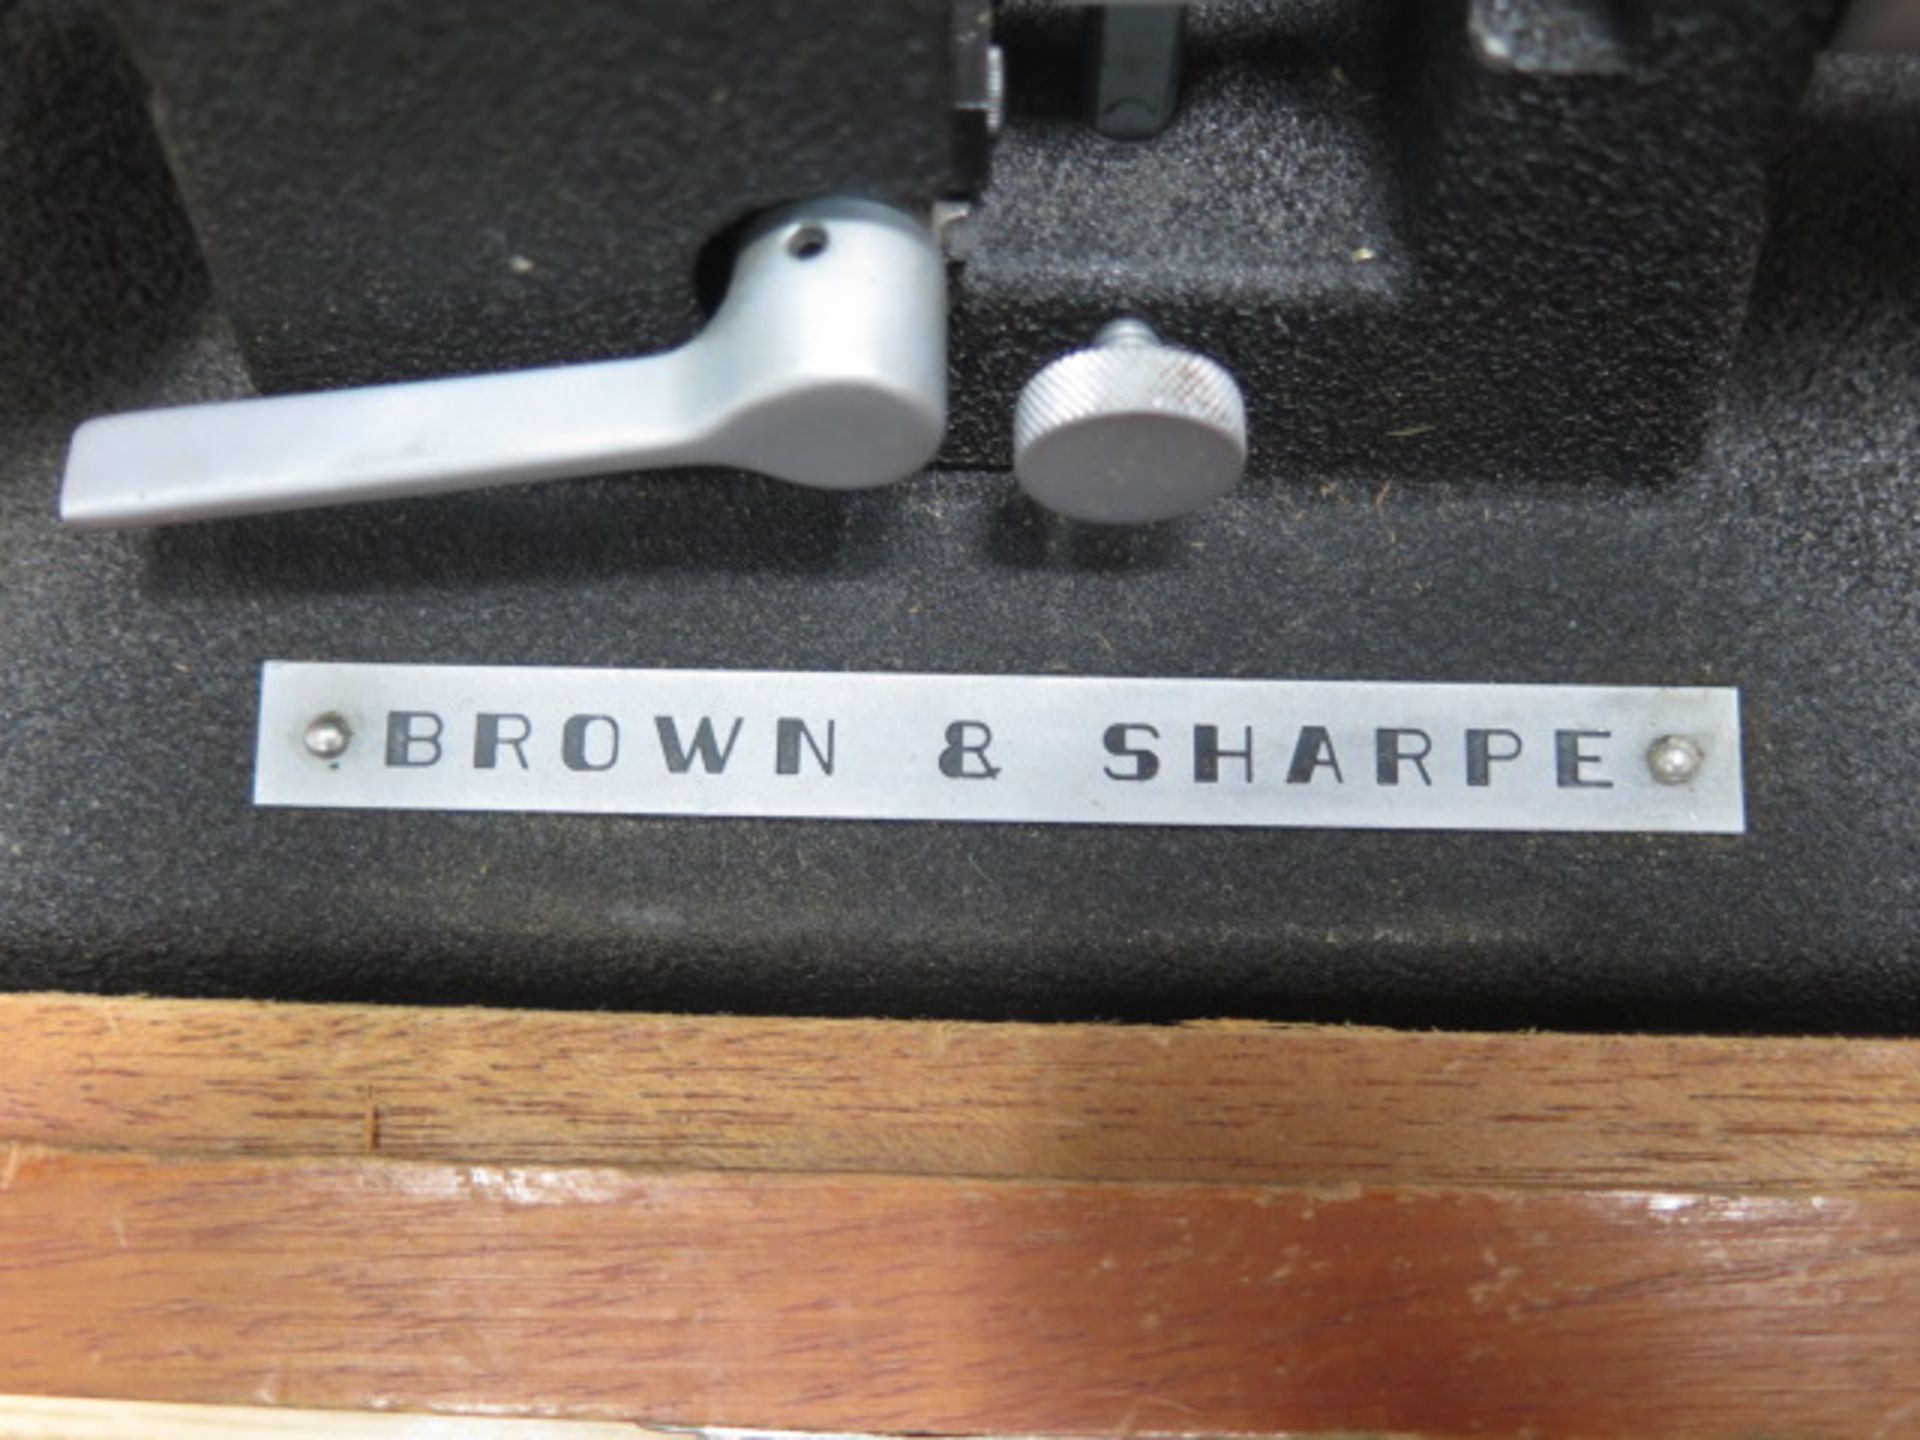 Brown & Sharpe 1/2" Bench Super Mic (SOLD AS-IS - NO WARRANTY) - Image 6 of 6